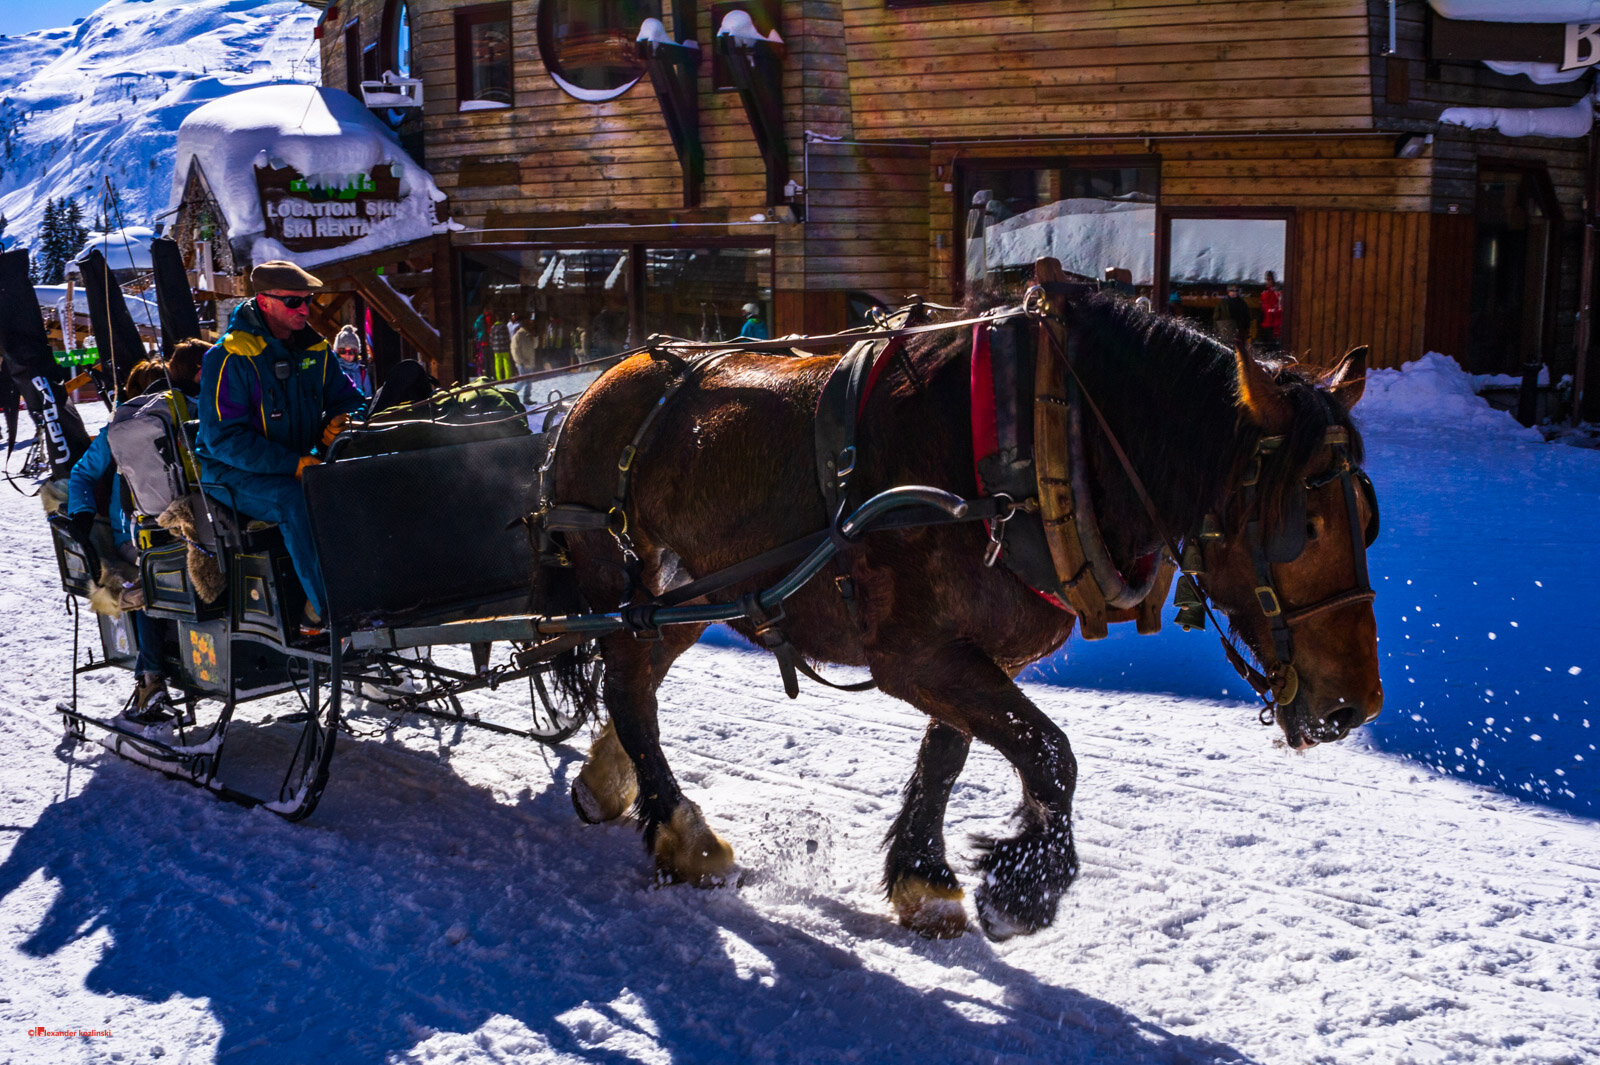 Horses (and ratracks): the only transport permitted in Avoriaz